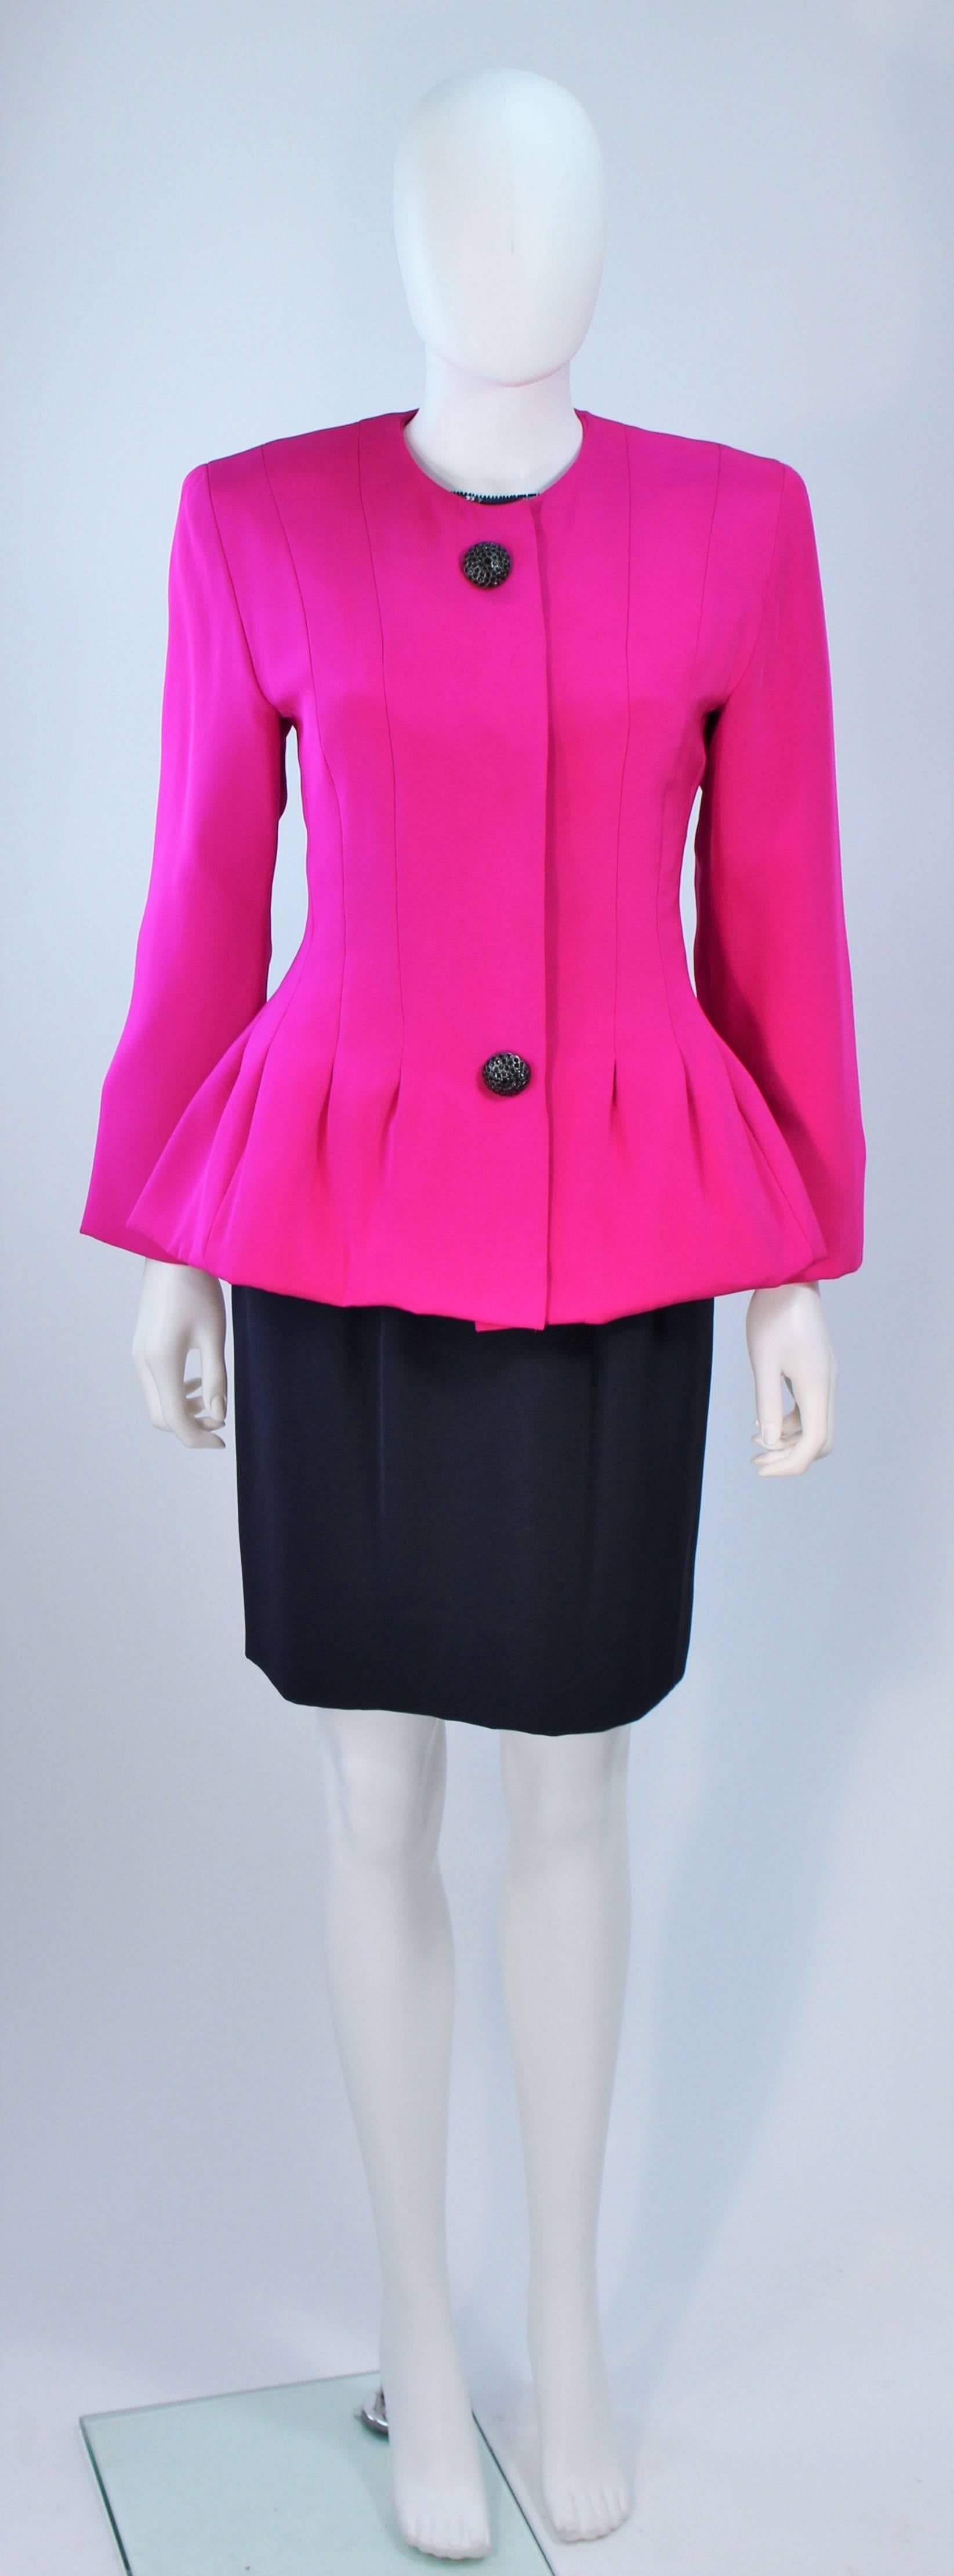  This Jacqueline De Ribes  skirt suit is composed of a magenta silk jacket with silk skirt and sequined chiffon blouse. The jacket features a peplum style with large black rhinestone buttons. There is a sequin sleeveless blouse in navy with side and